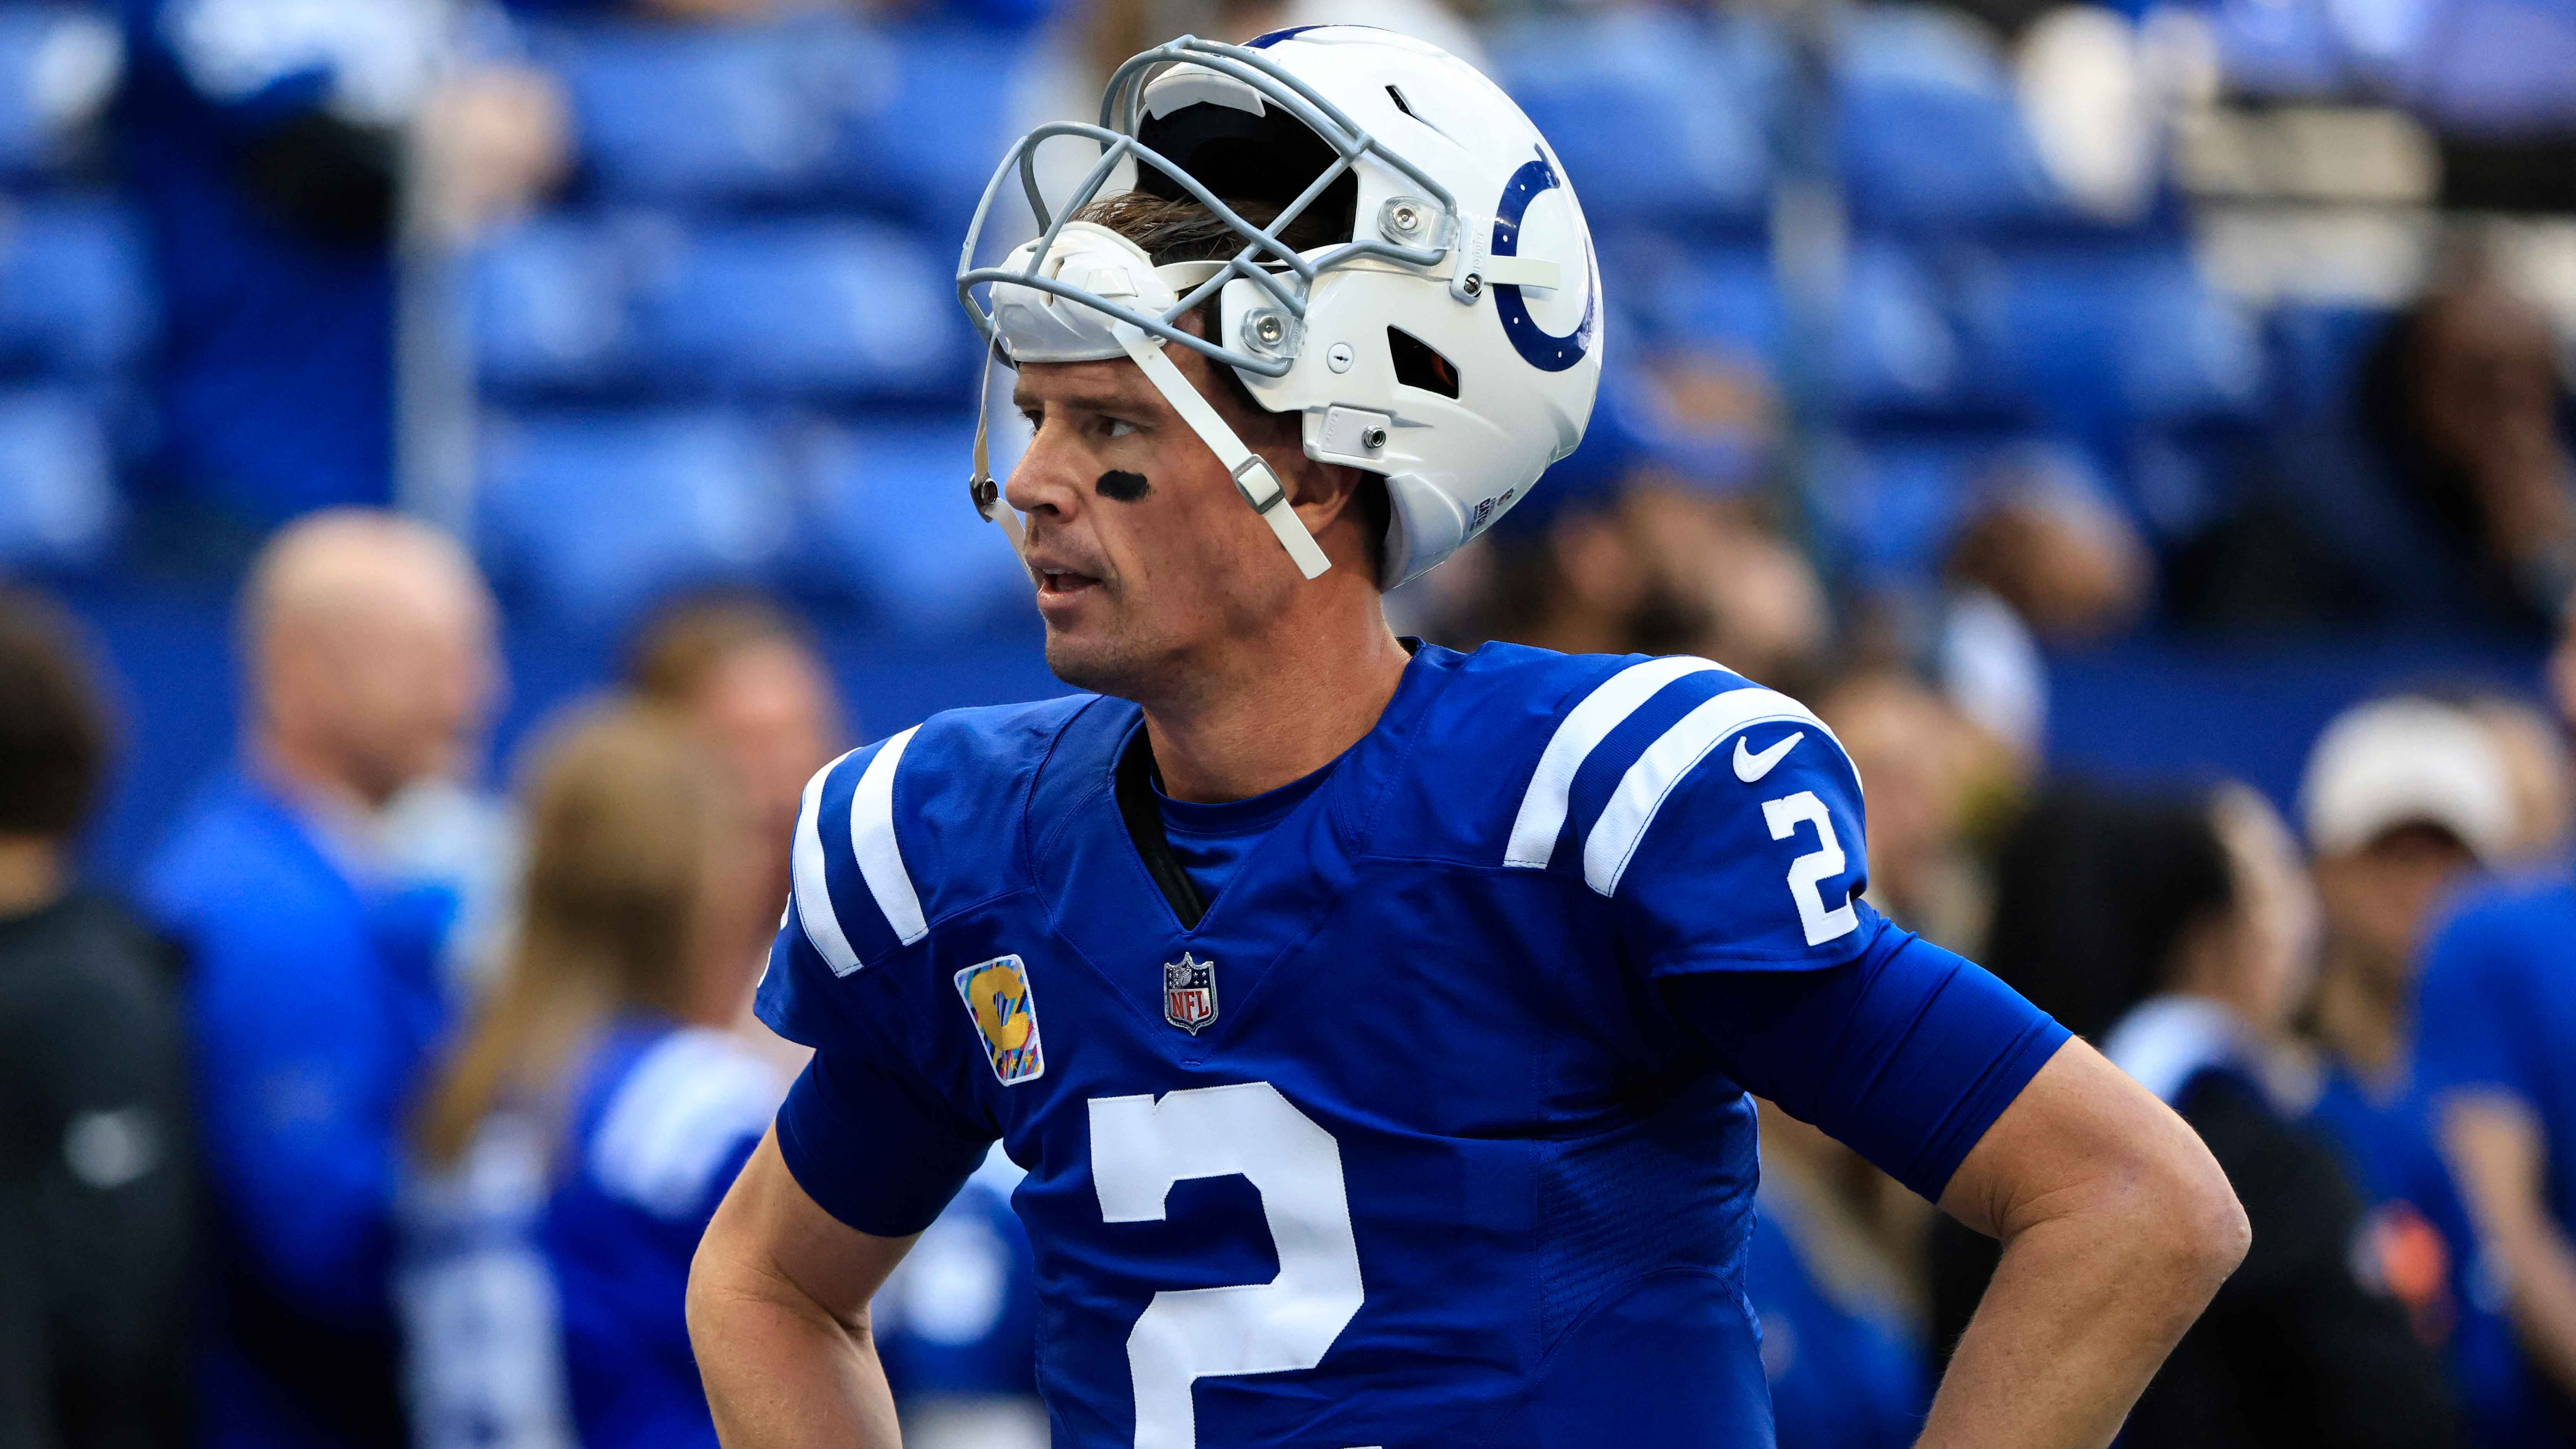 NFL FILE: Peyton Manning (18) of the Indianapolis Colts and Ryan